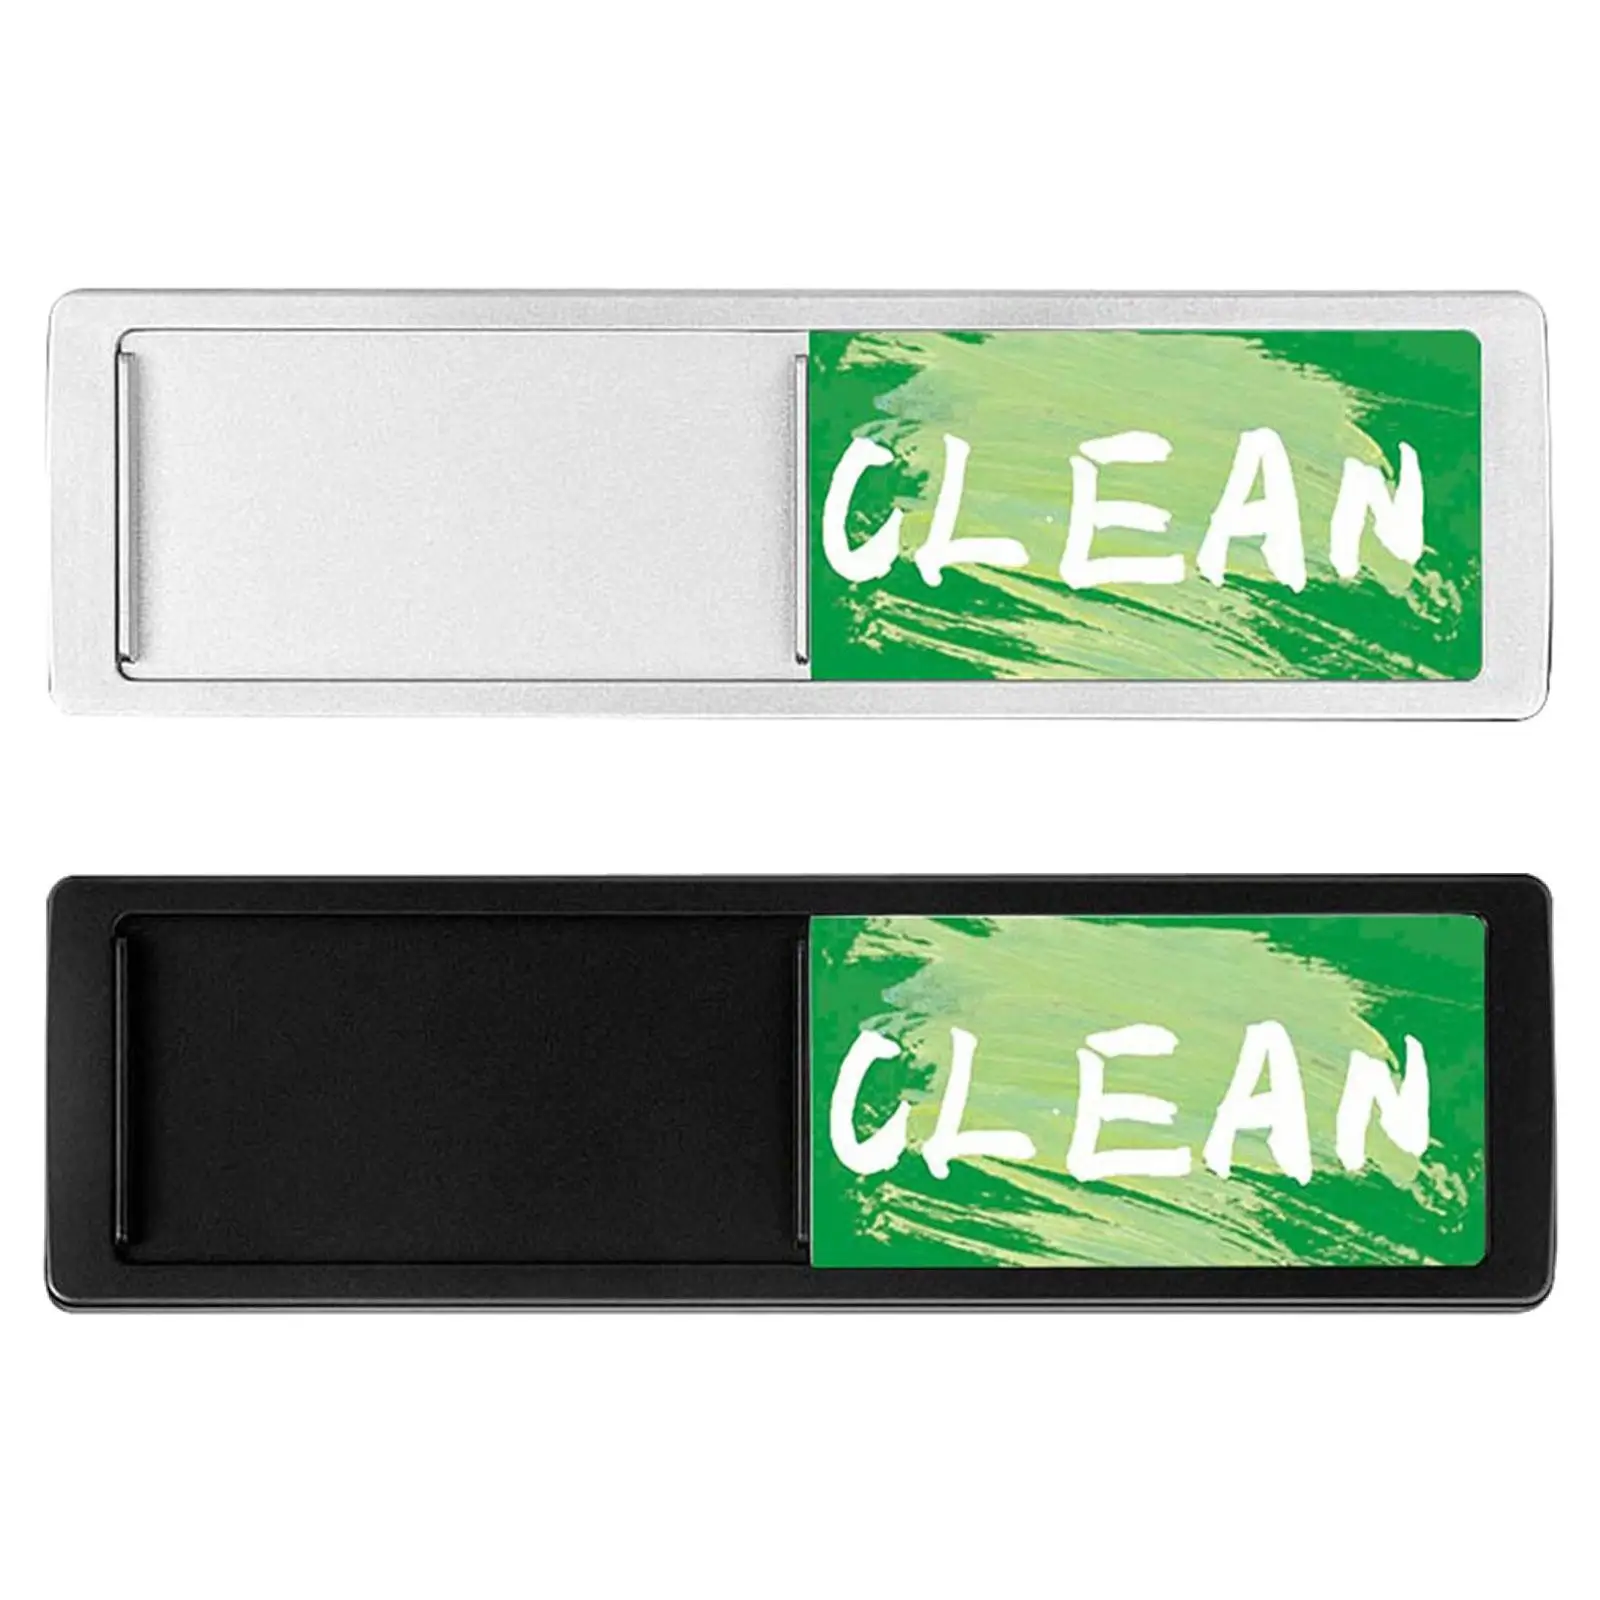 Double Sided Dishwasher Clean Dirty Sign Indicator Dishwasher Cleaning Indicator Portable for Washing Machine Laundry Kitchen